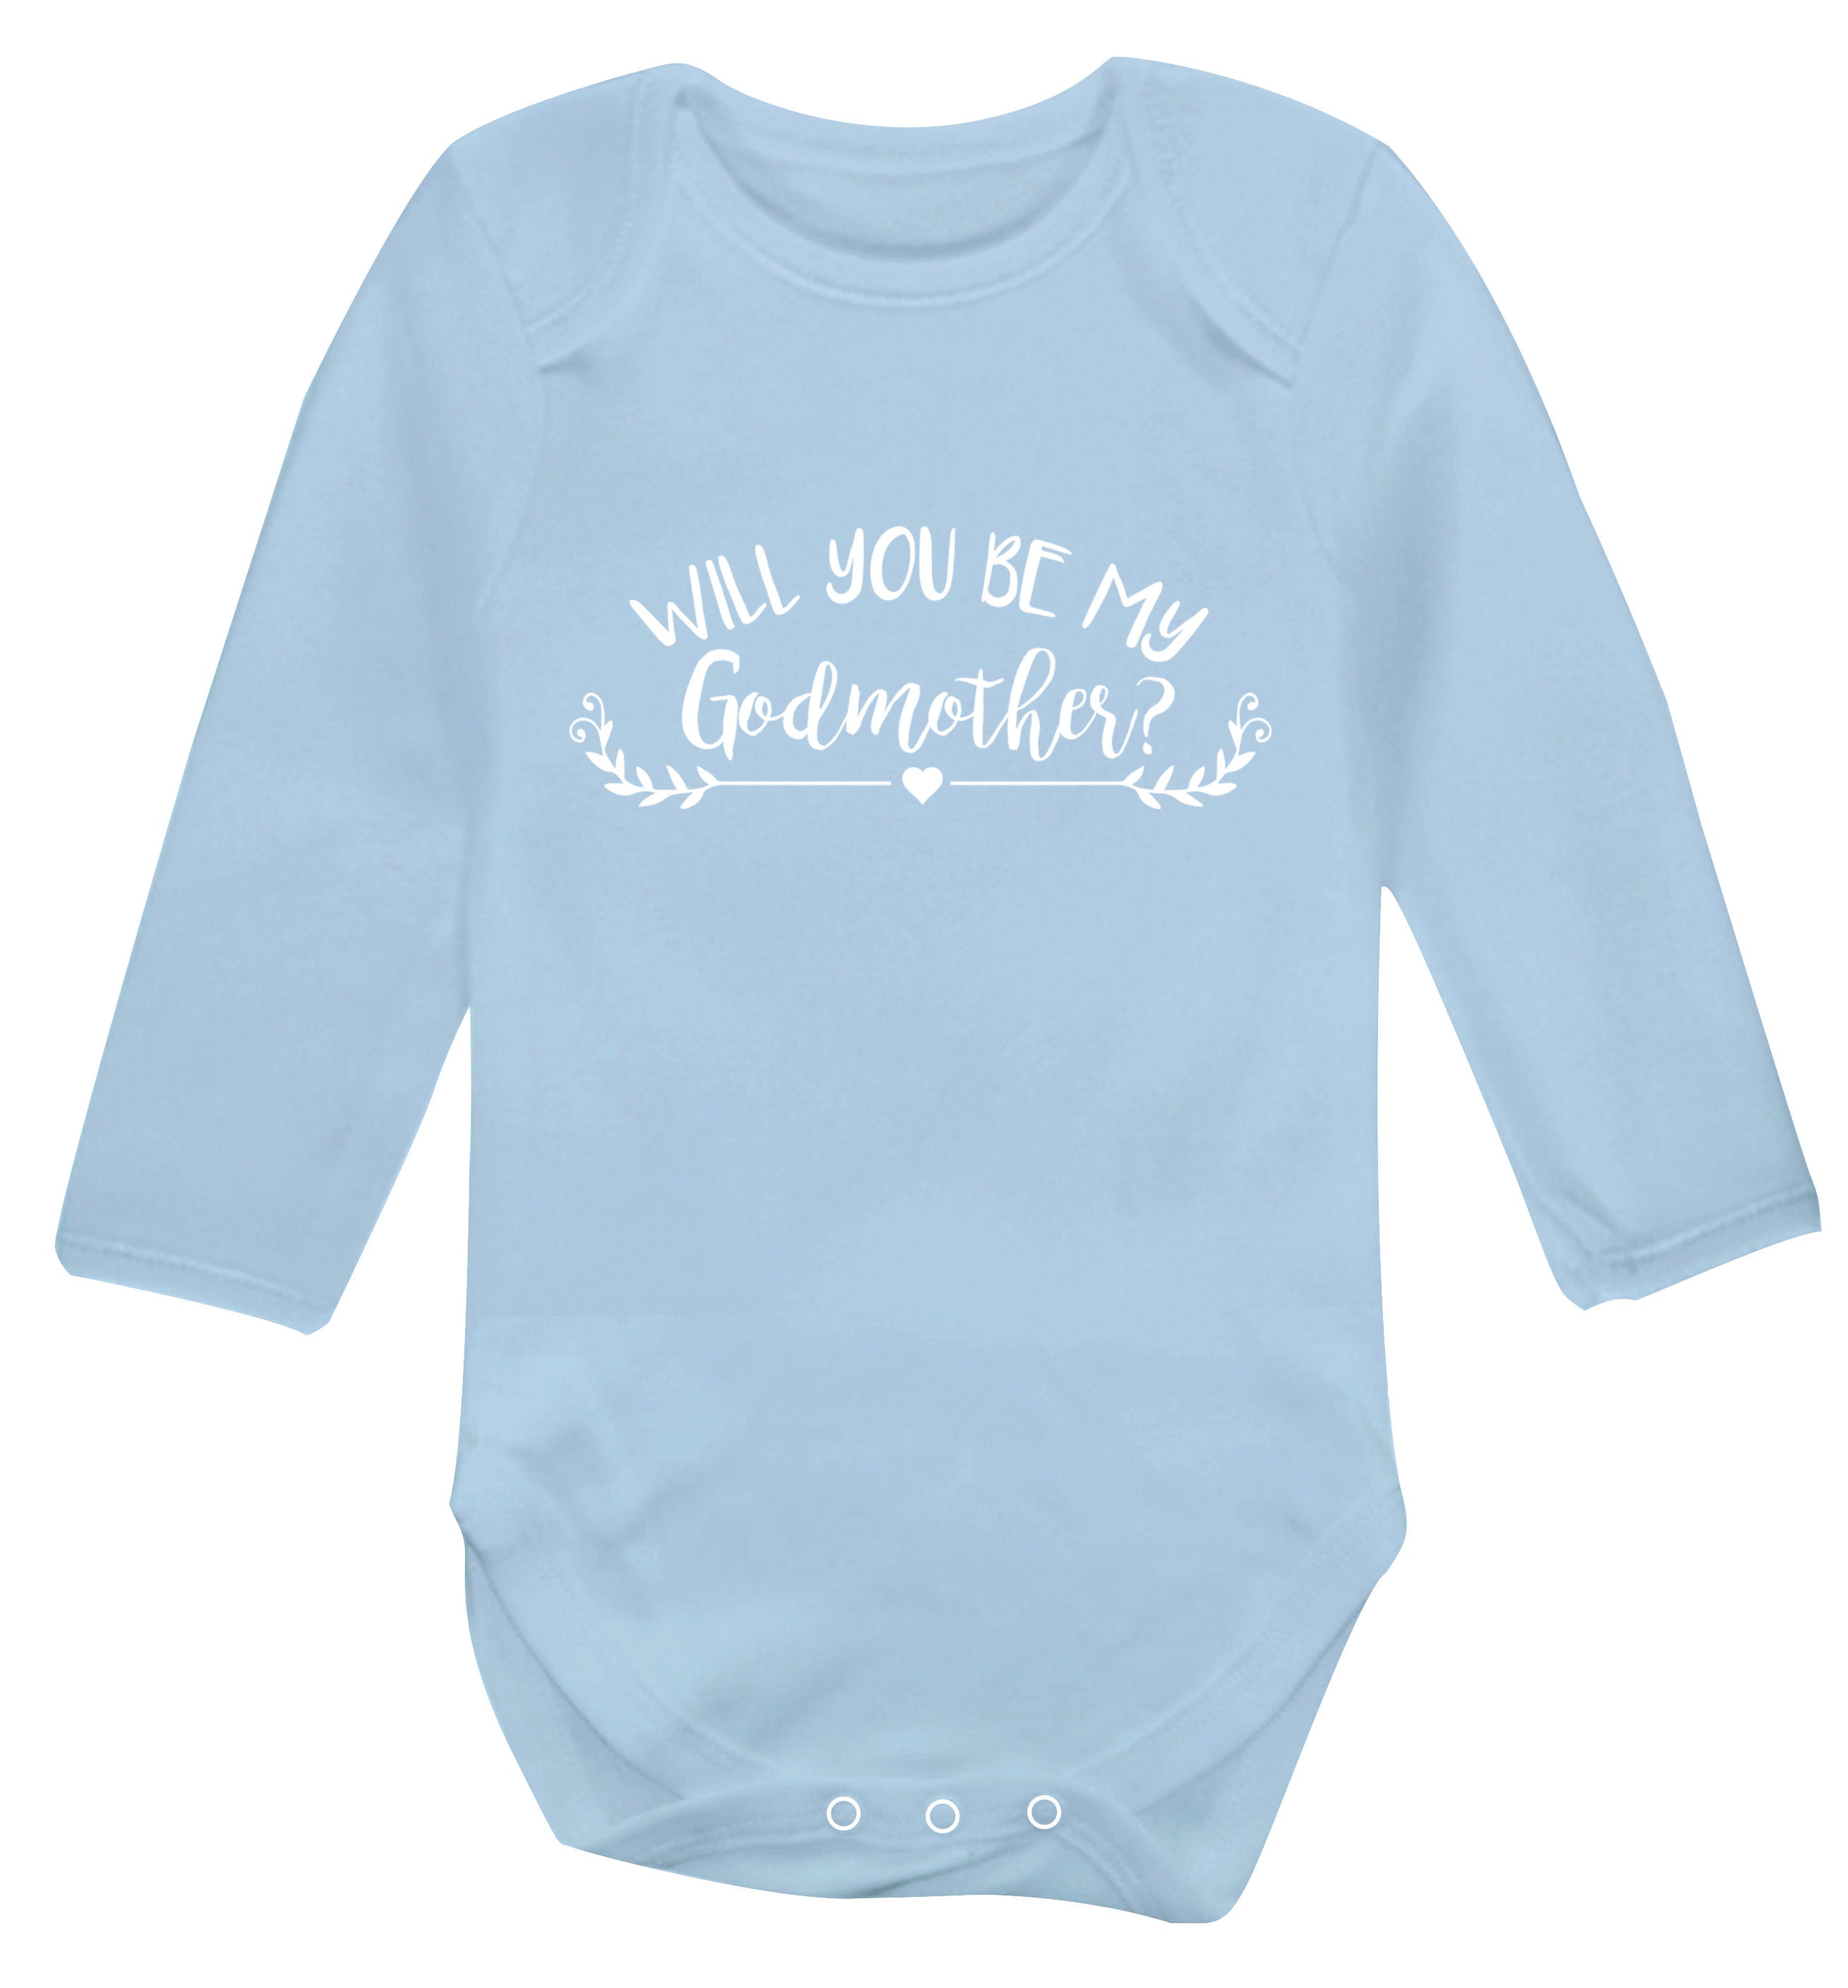 Heart Christening Cute Baby Grow Body Suit Vest Will you be my Godmother 